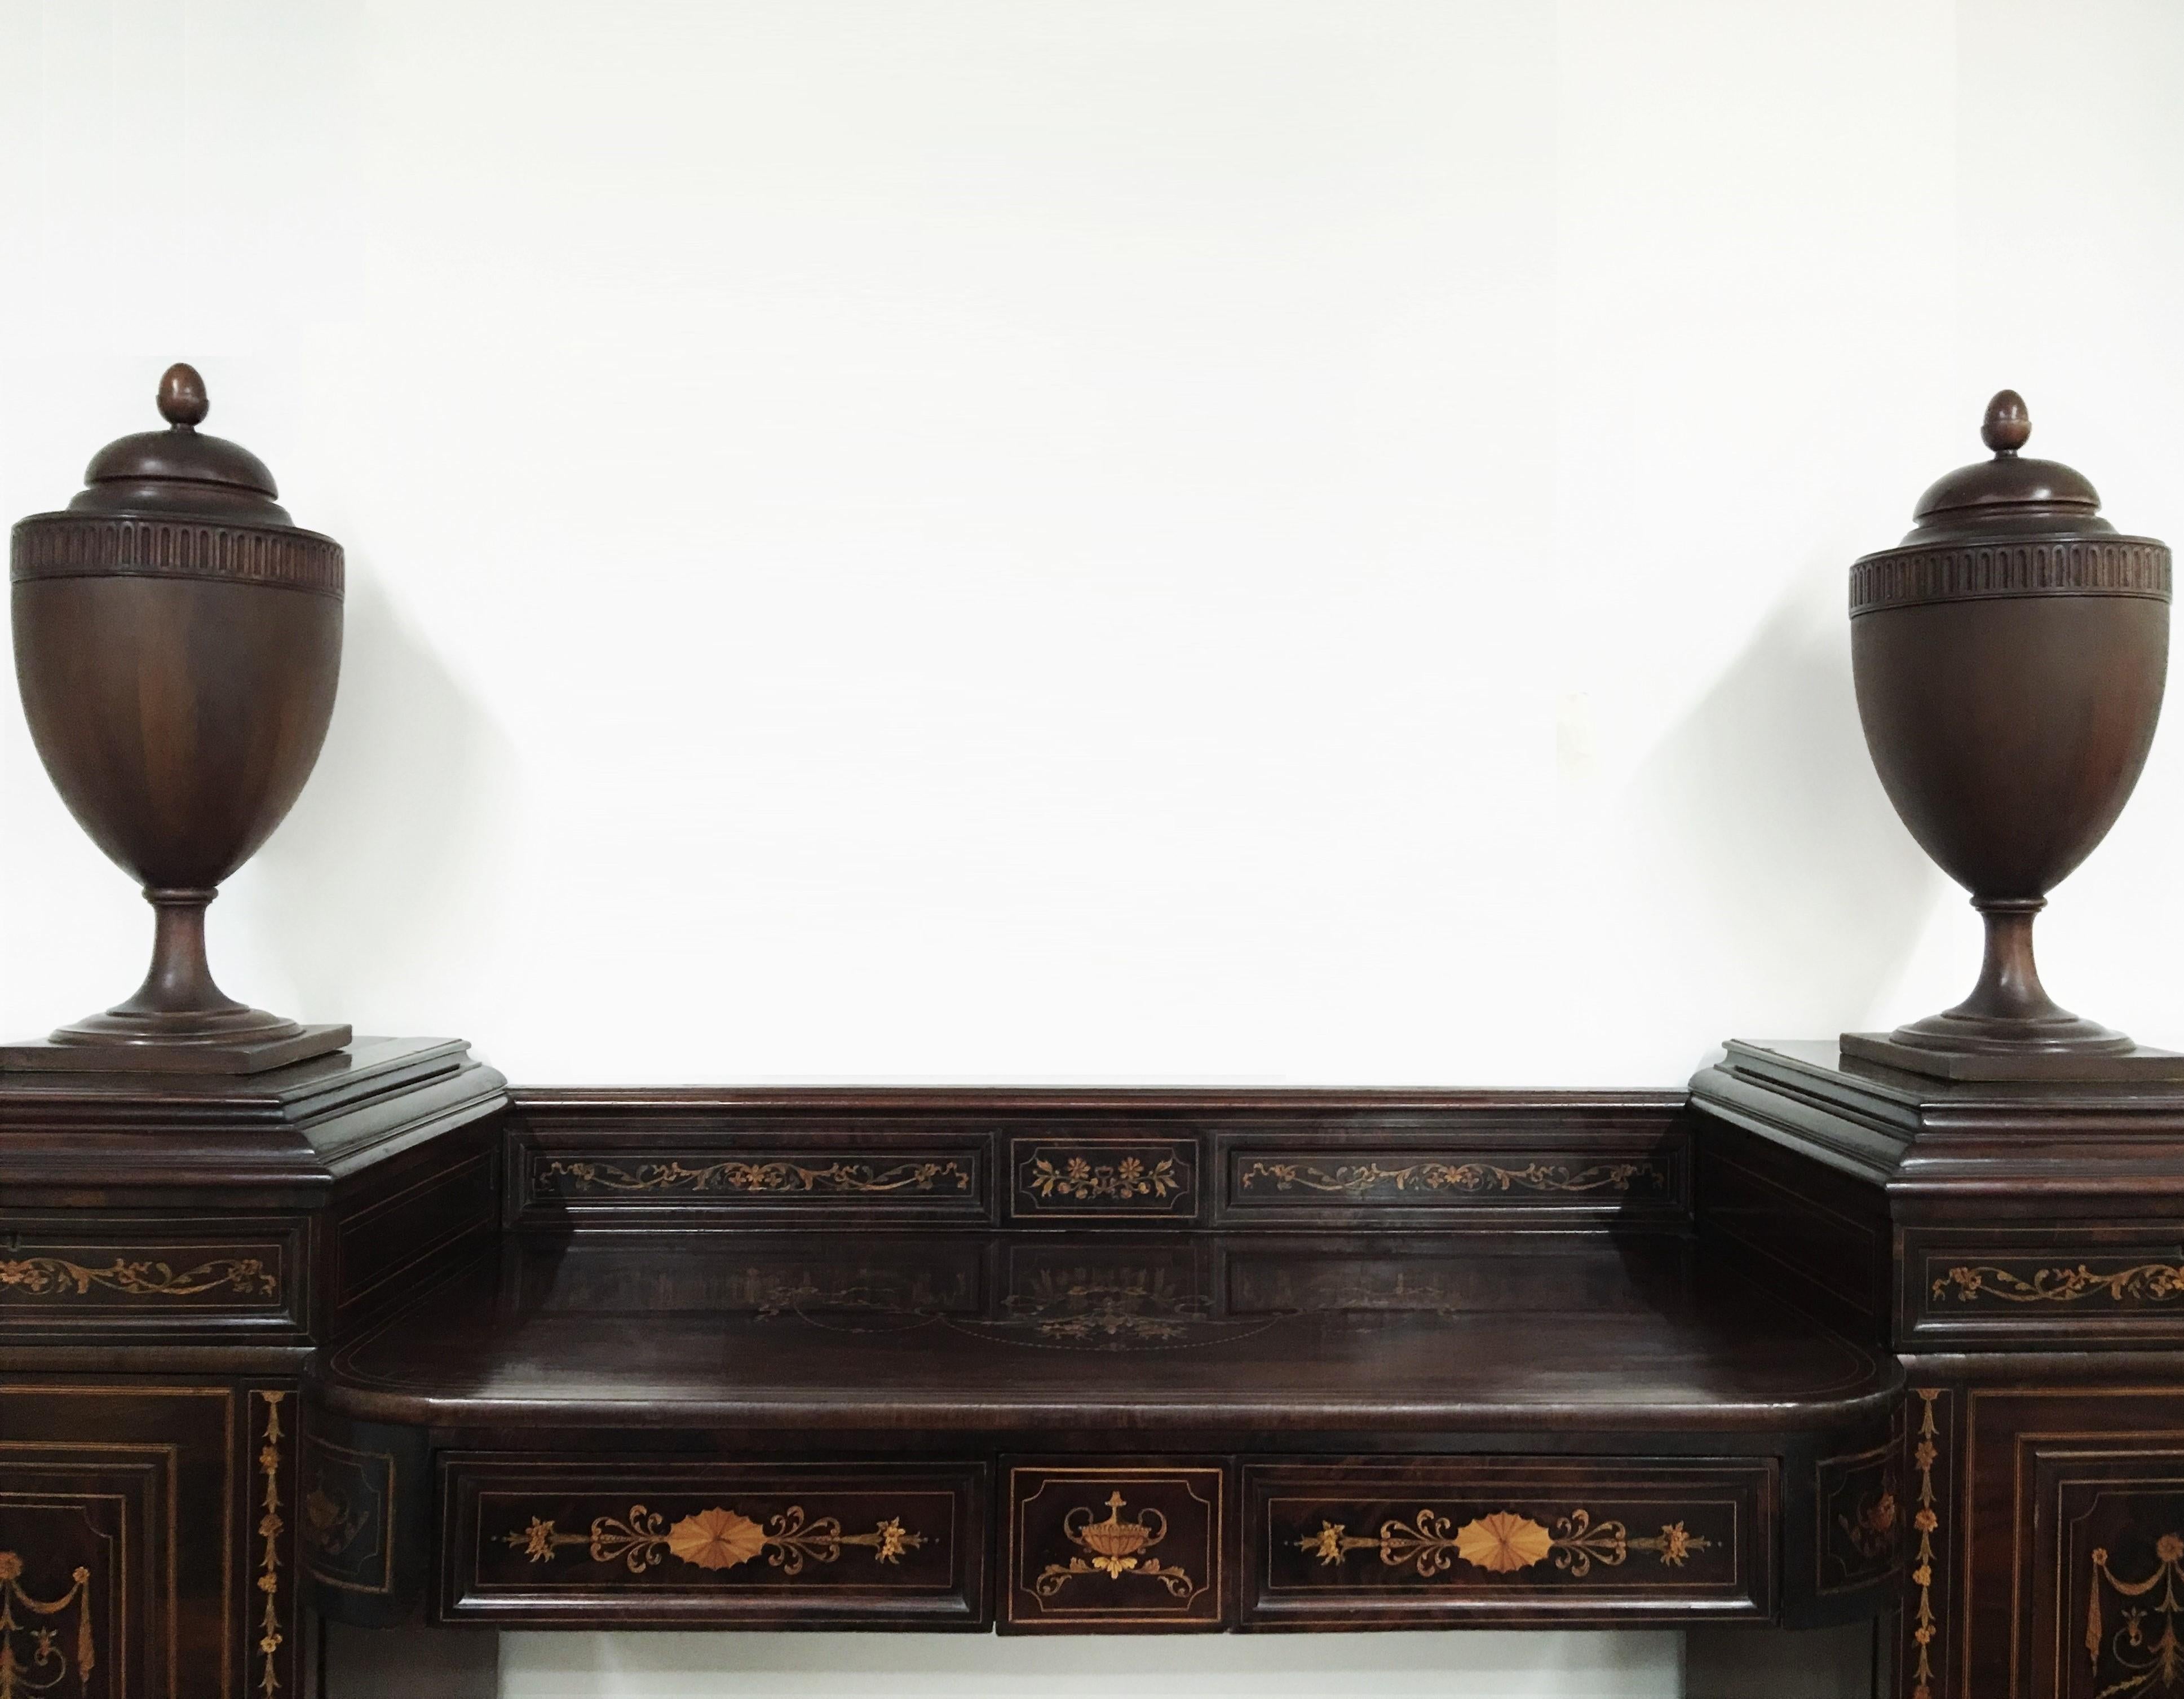 Important Regency marquetry inlaid rosewood pedestal sideboard with cutlery urns attributed to Mayhew and Ince. Decorated throughout with fine quality marquetry of pale woods inset into a contrasting rosewood ground showing floral arrangements,